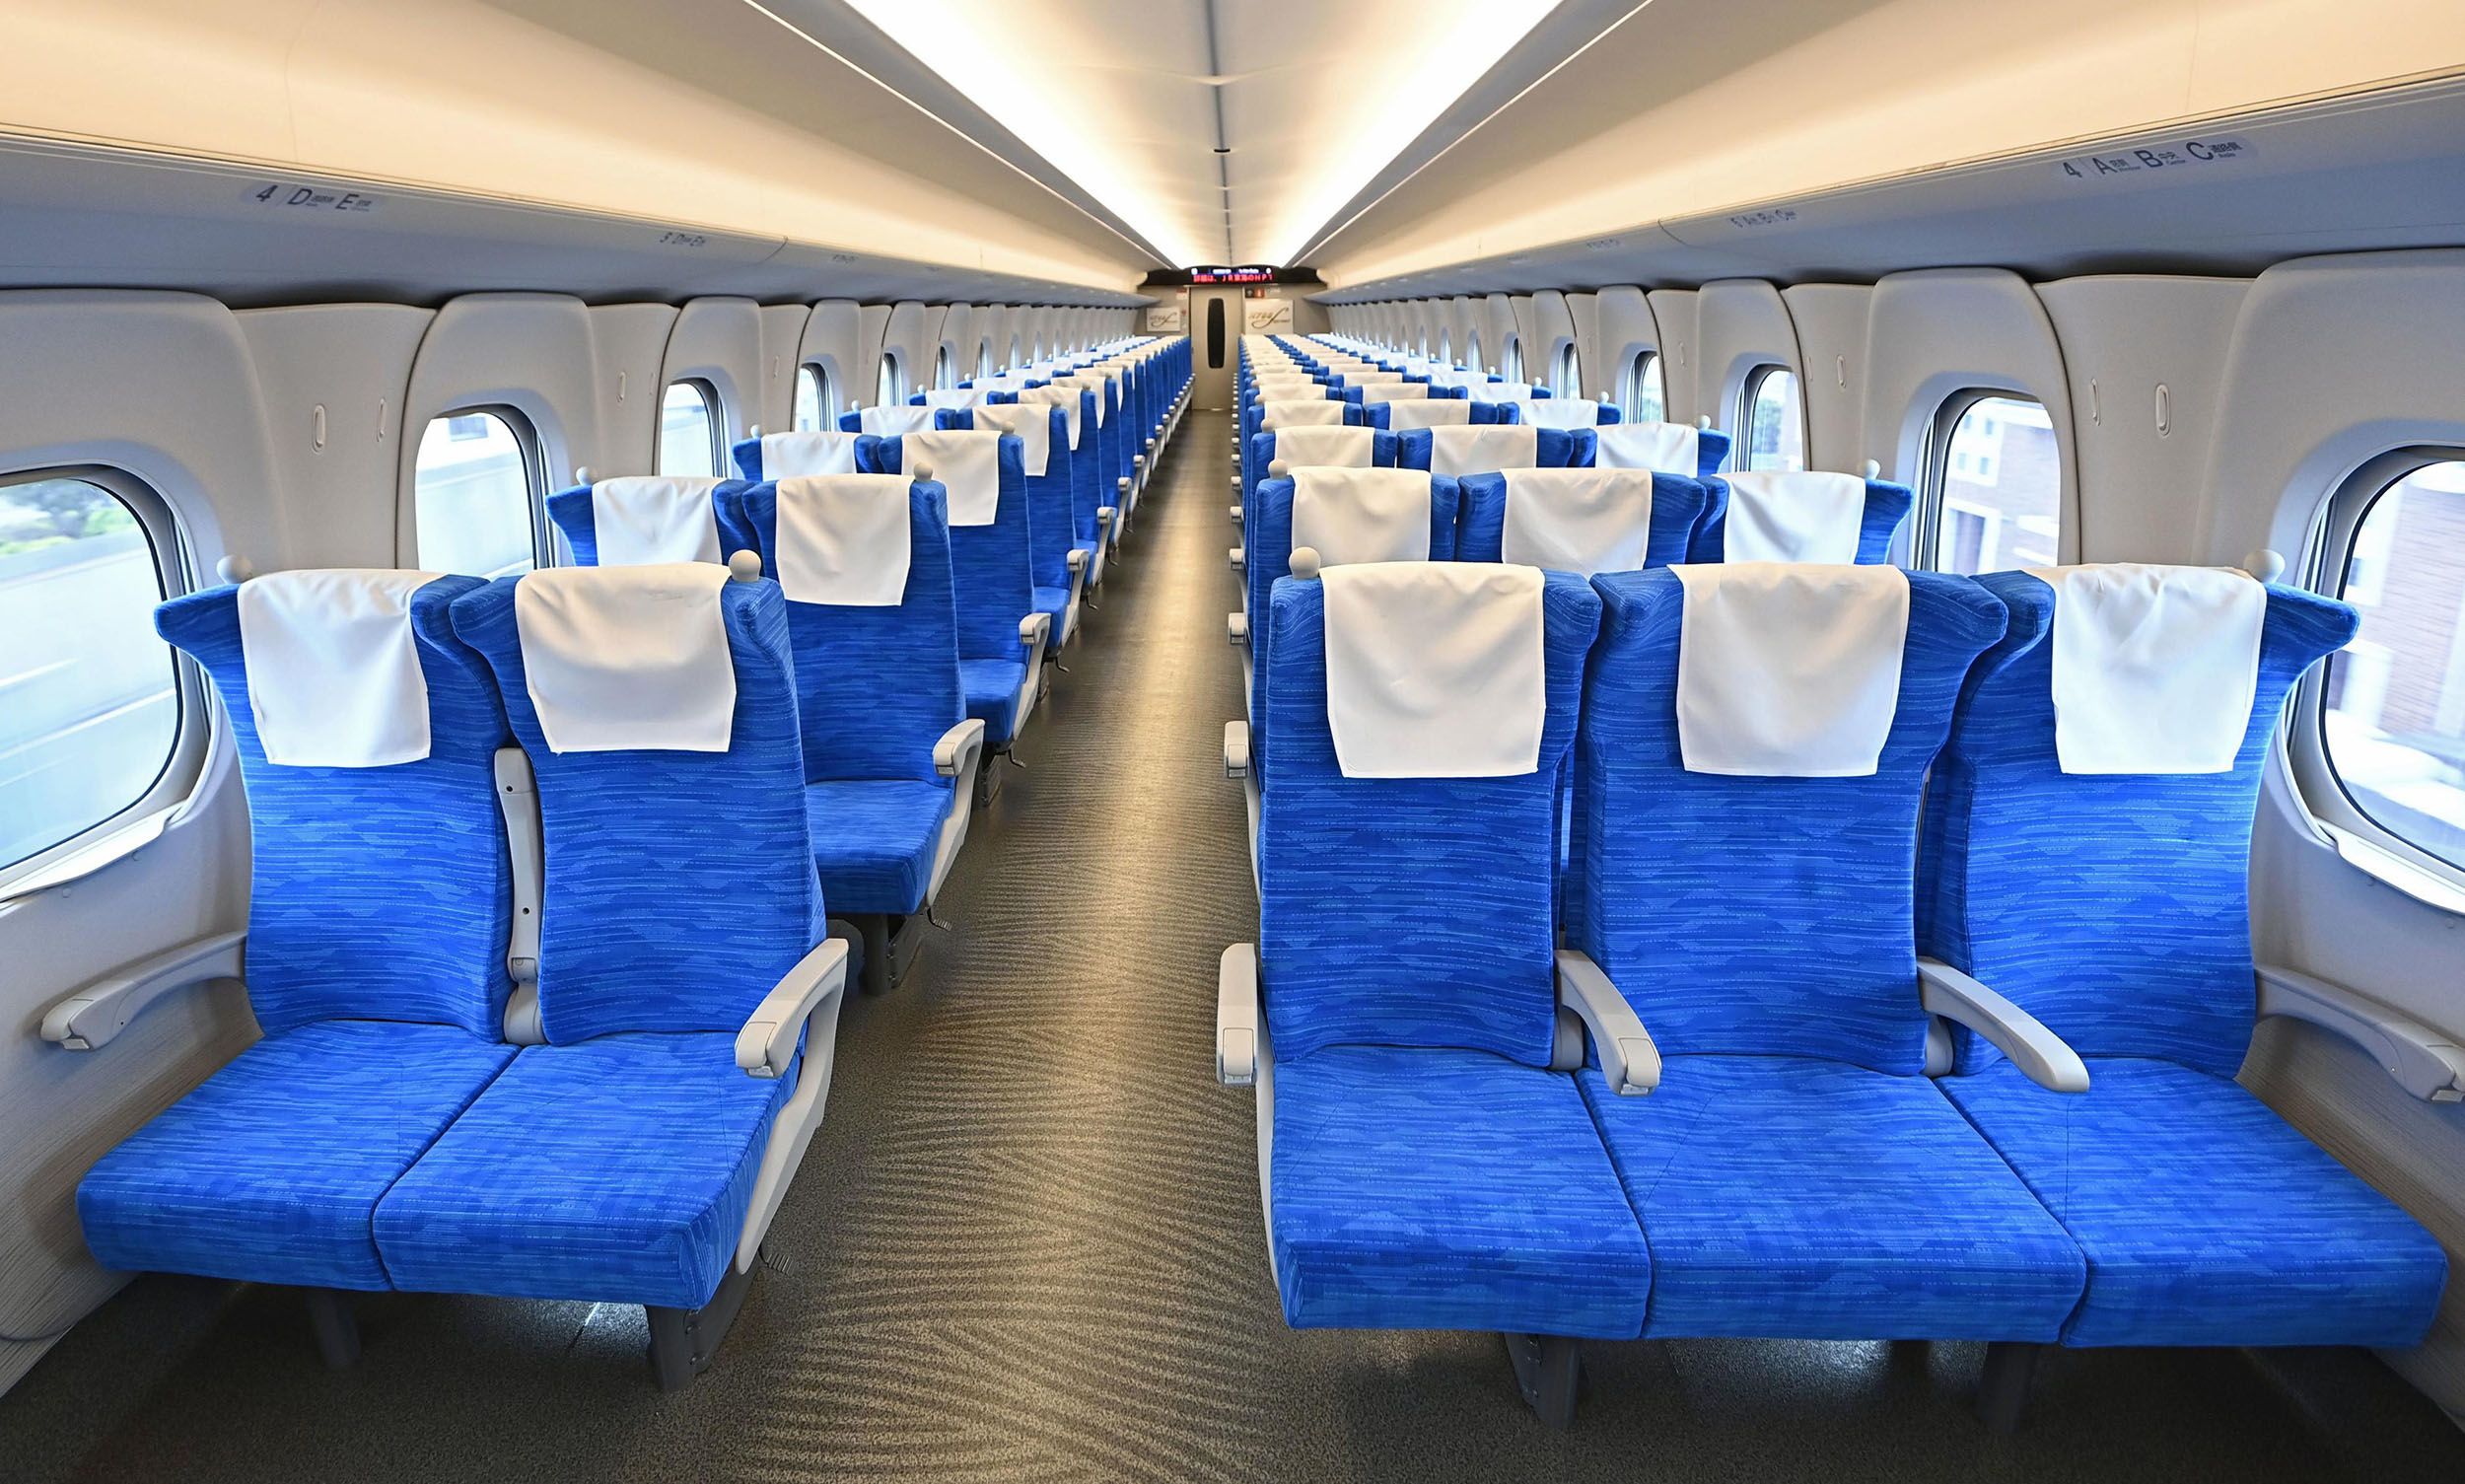 Application of Reverse Osmosis Equipment in Cleaning Train Carriages in Japan